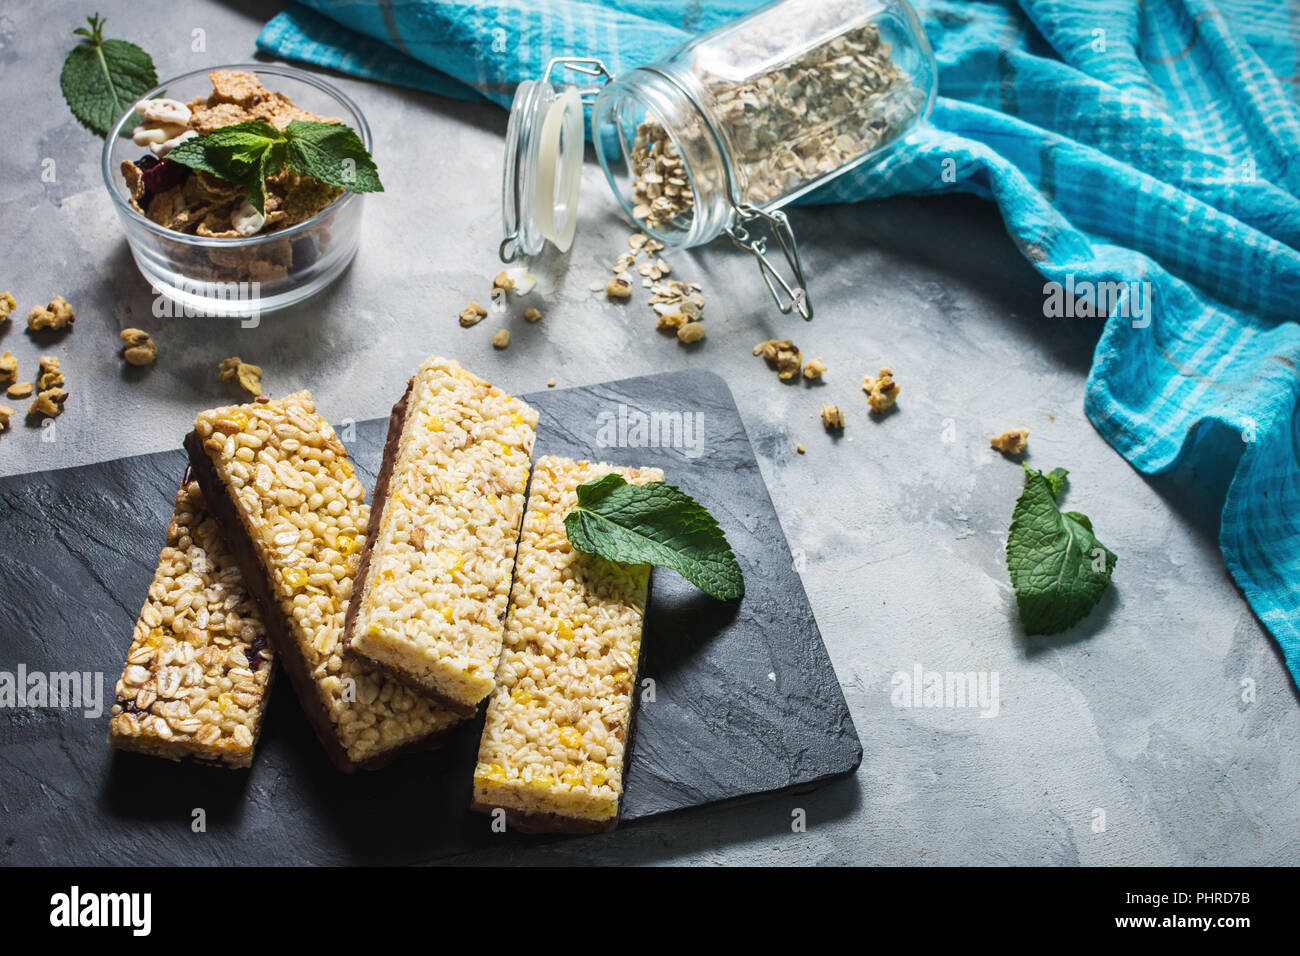 Granola energy bars with oatmeal, almond, dry cranberry. Healthy snack on concrete background. Stock Photo